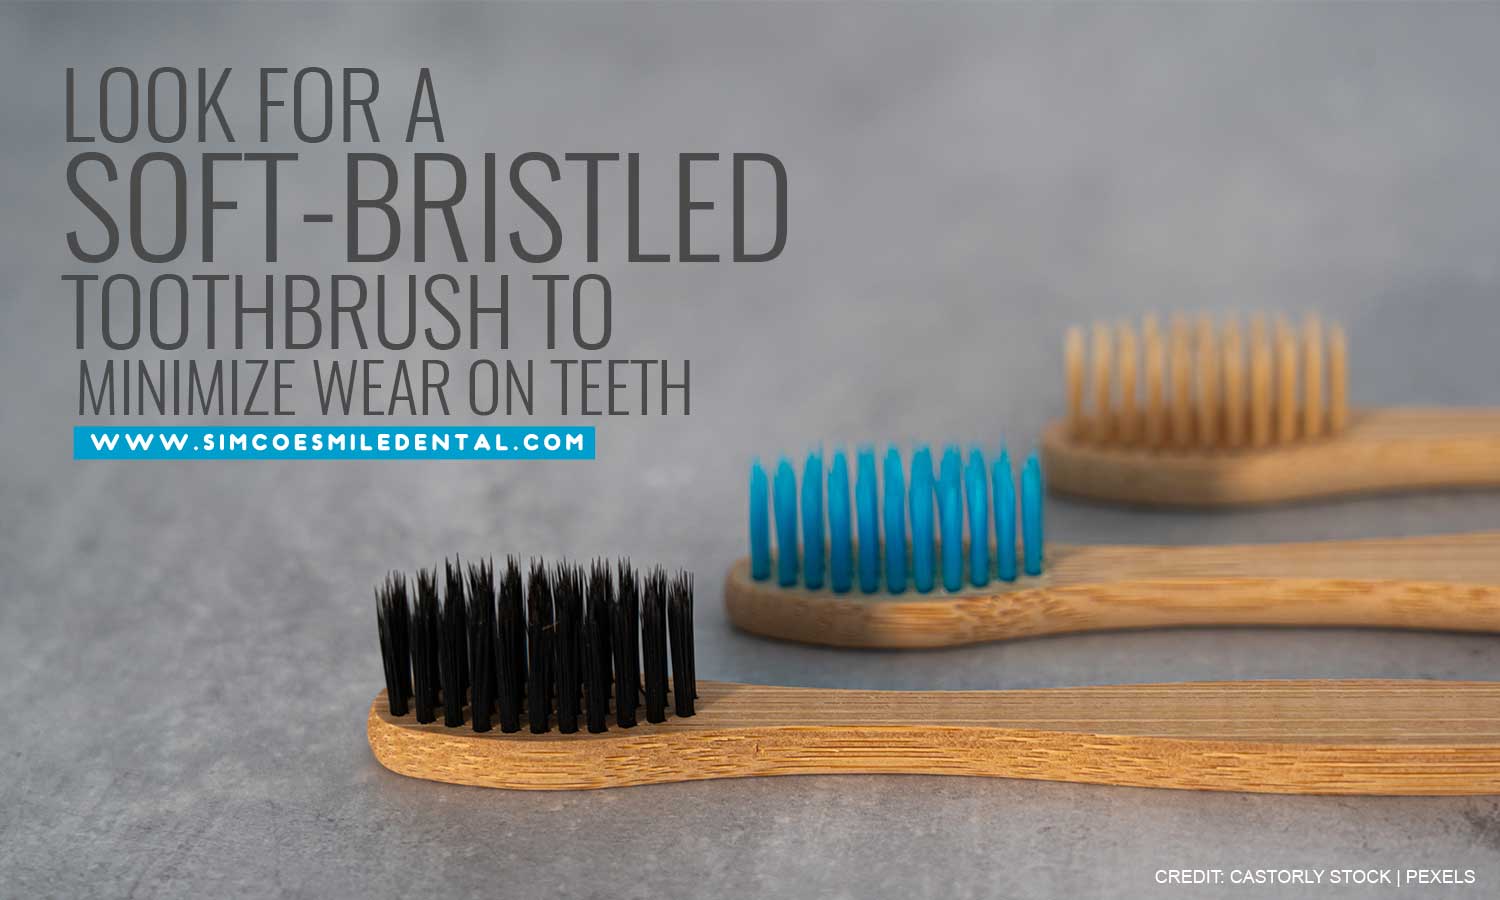 Look for a soft-bristled toothbrush to minimize wear on teeth